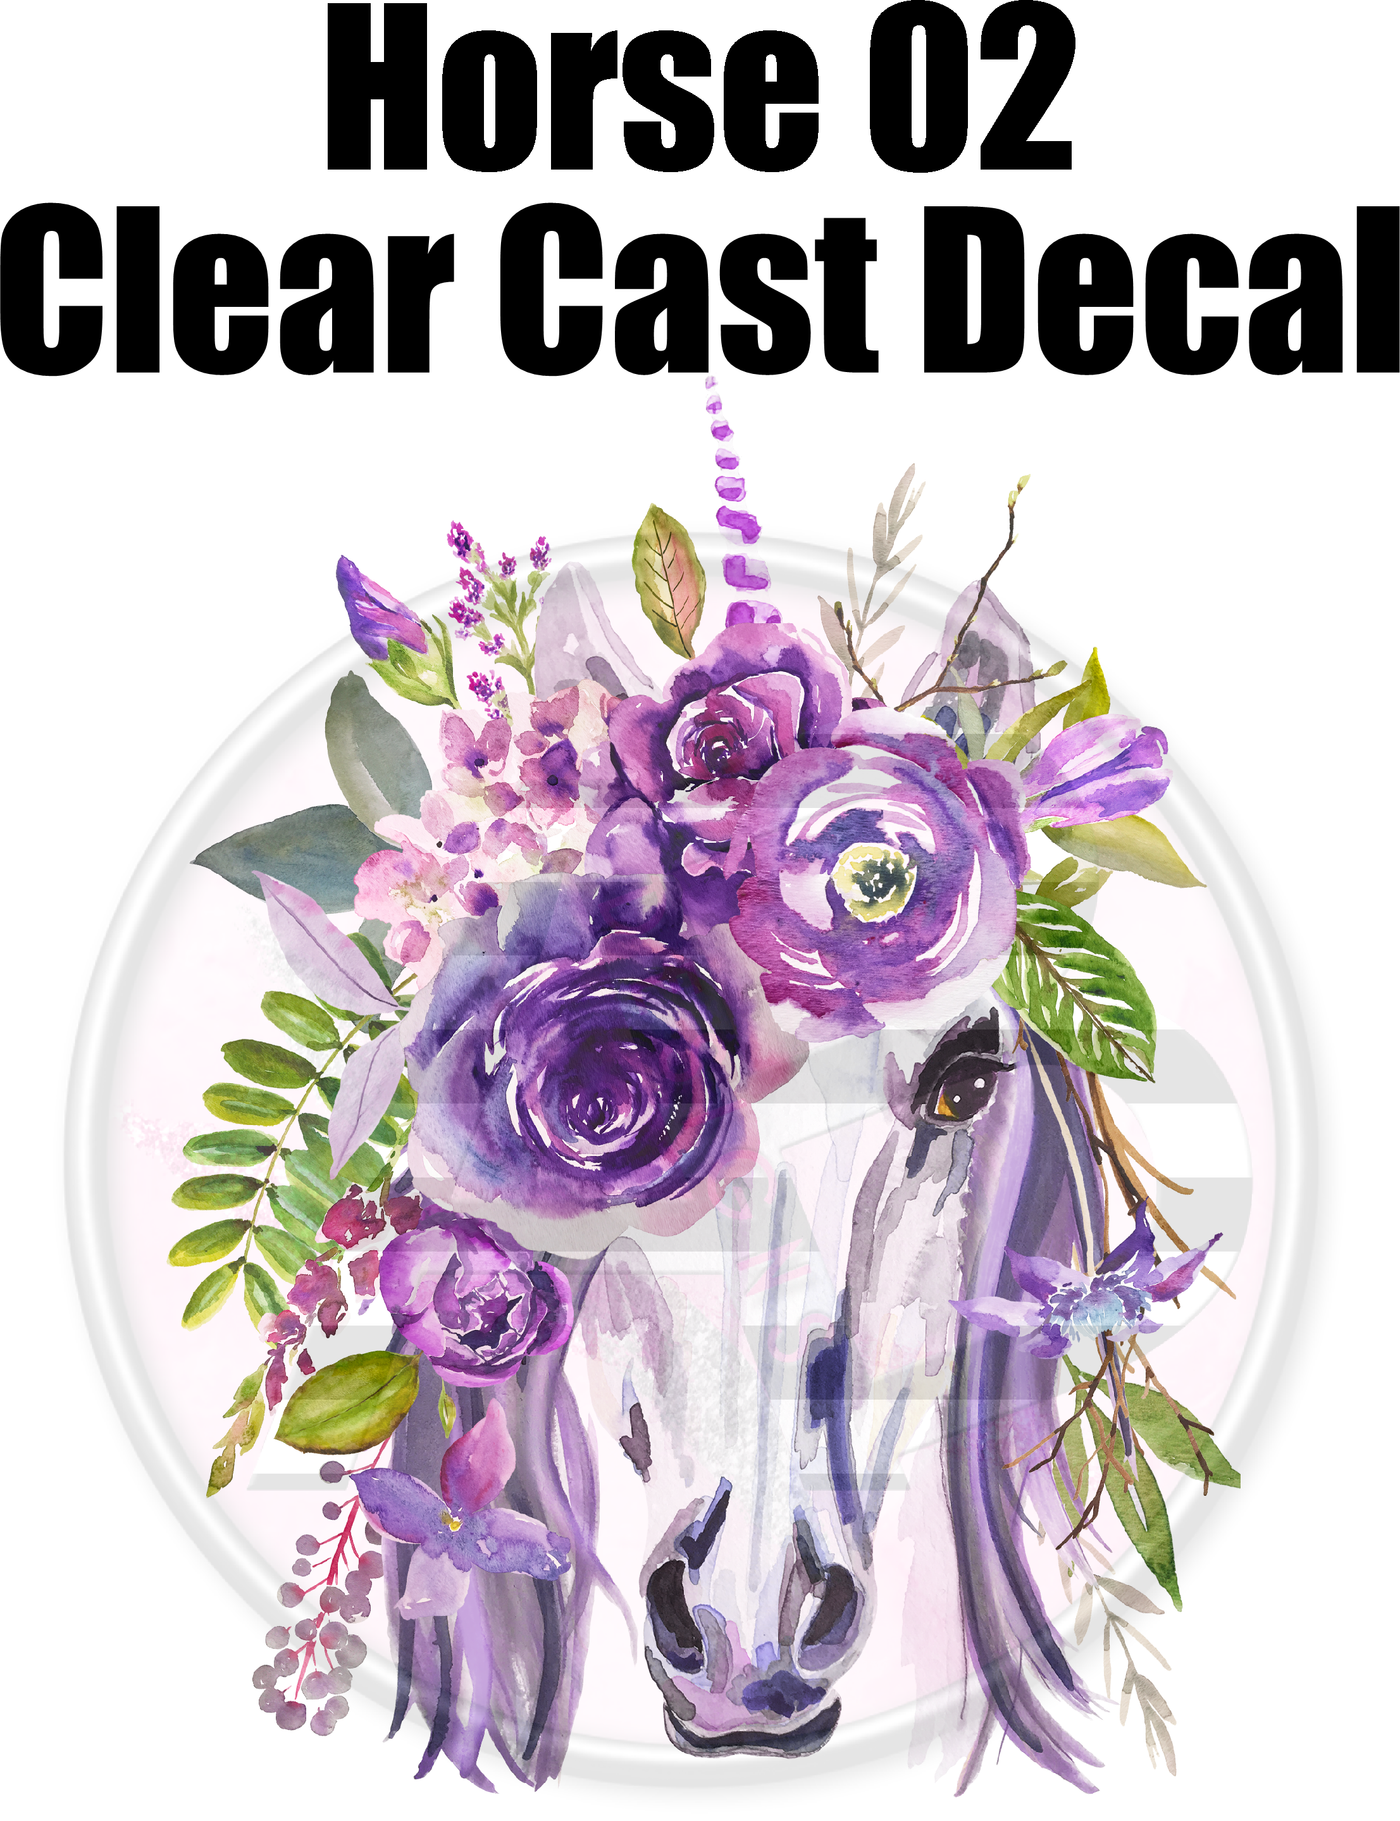 Horse 02 - Clear Cast Decal